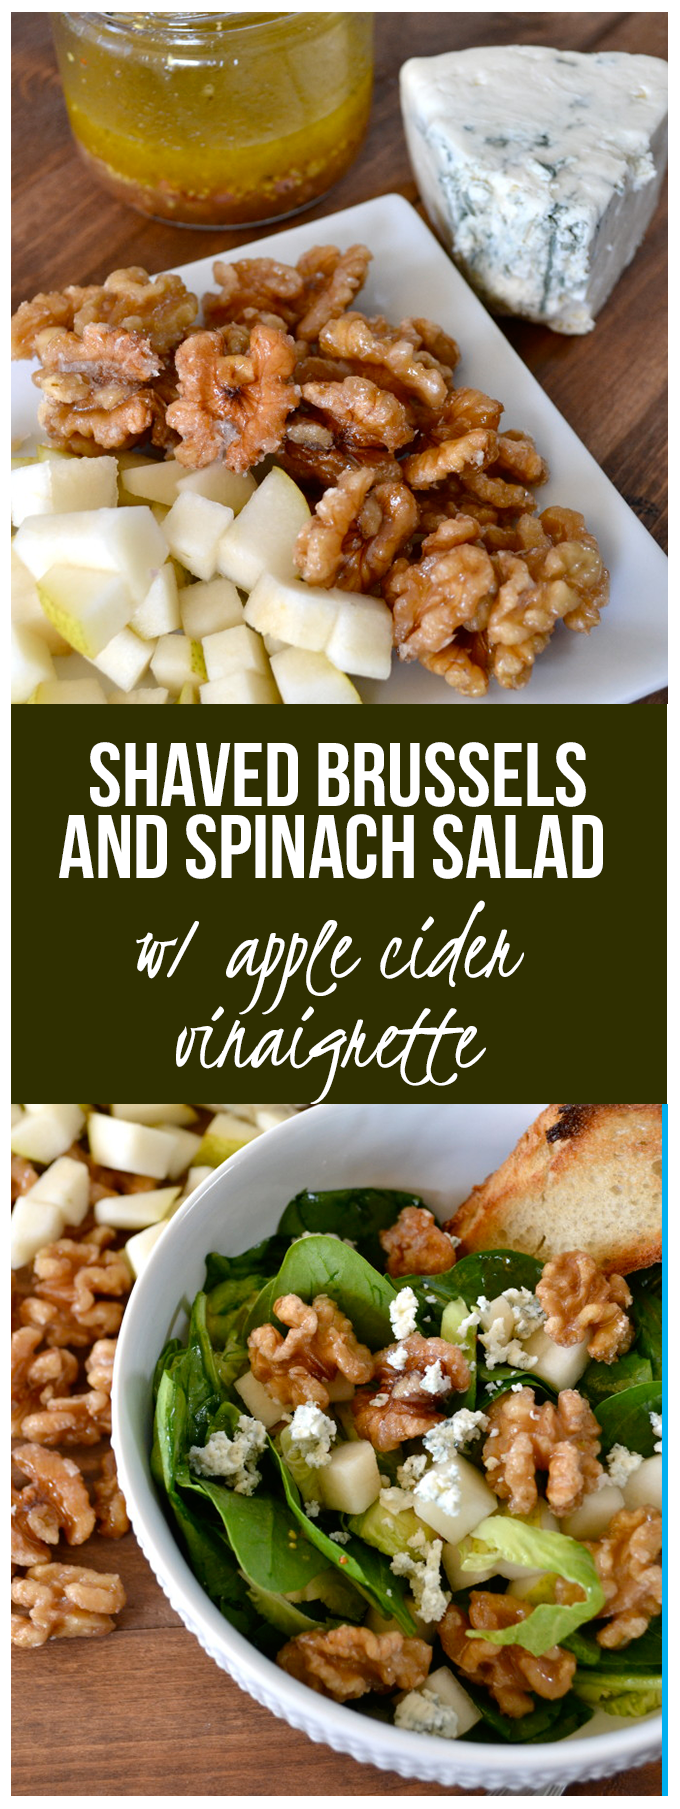 Shaved Brussels and Spinach Salad with Apple Cider Vinaigrette